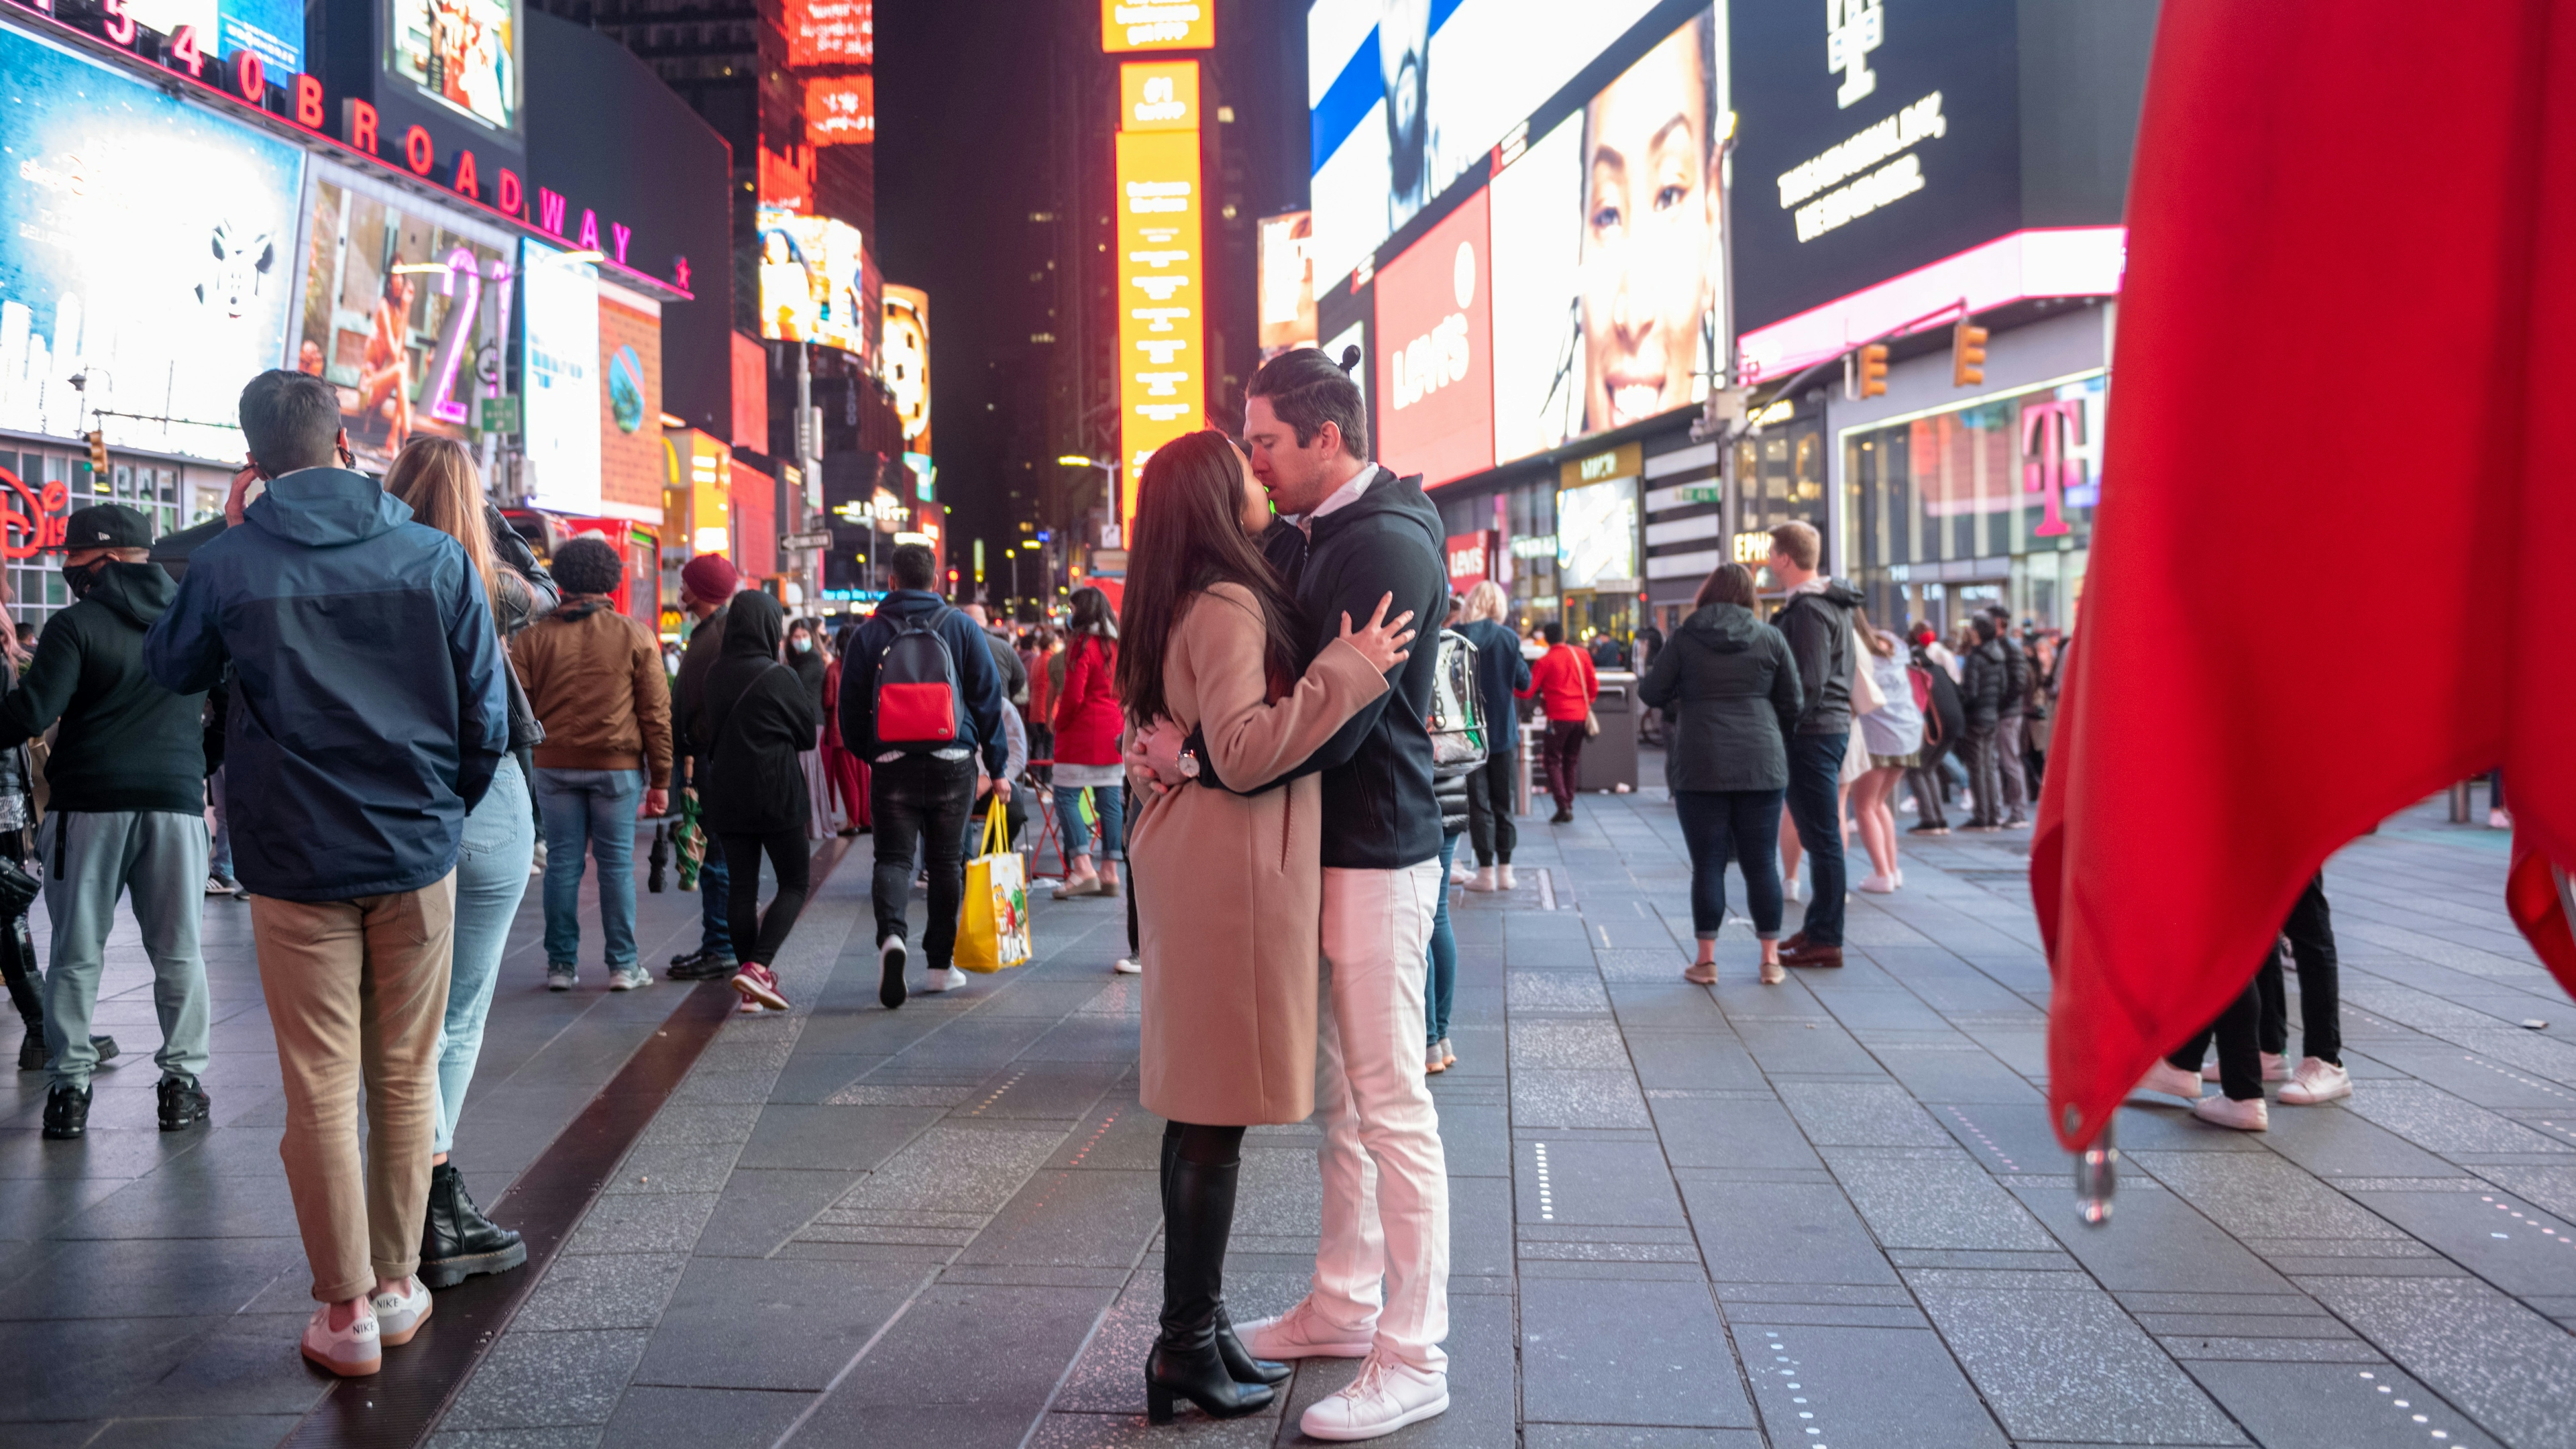 A couple kisses in Times Square on Memorial Day weekend on May 29, 2021 in New York City. On May 19, 2021.